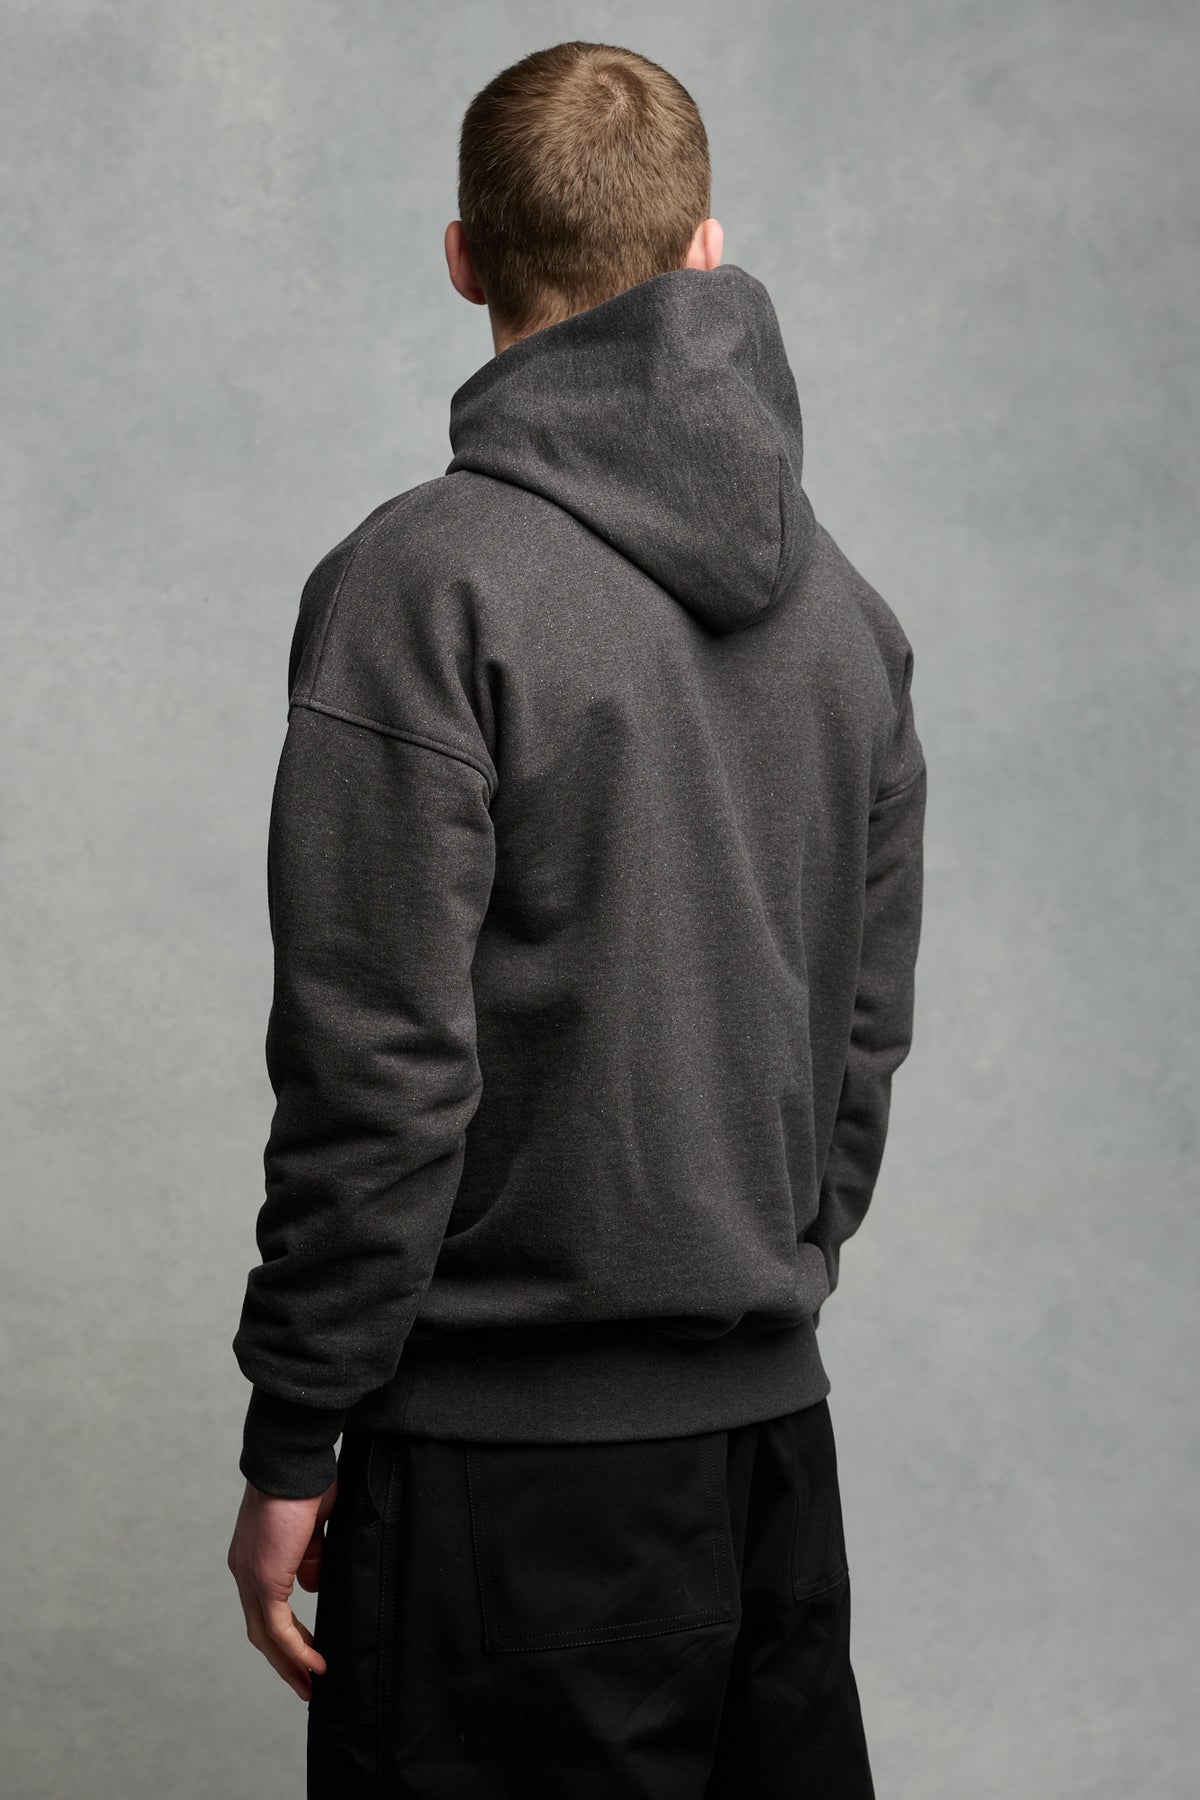 
            Thigh up image of the back of brunet male wearing heritage hooded sweatshirt in charcoal paired with cameraman pants in black